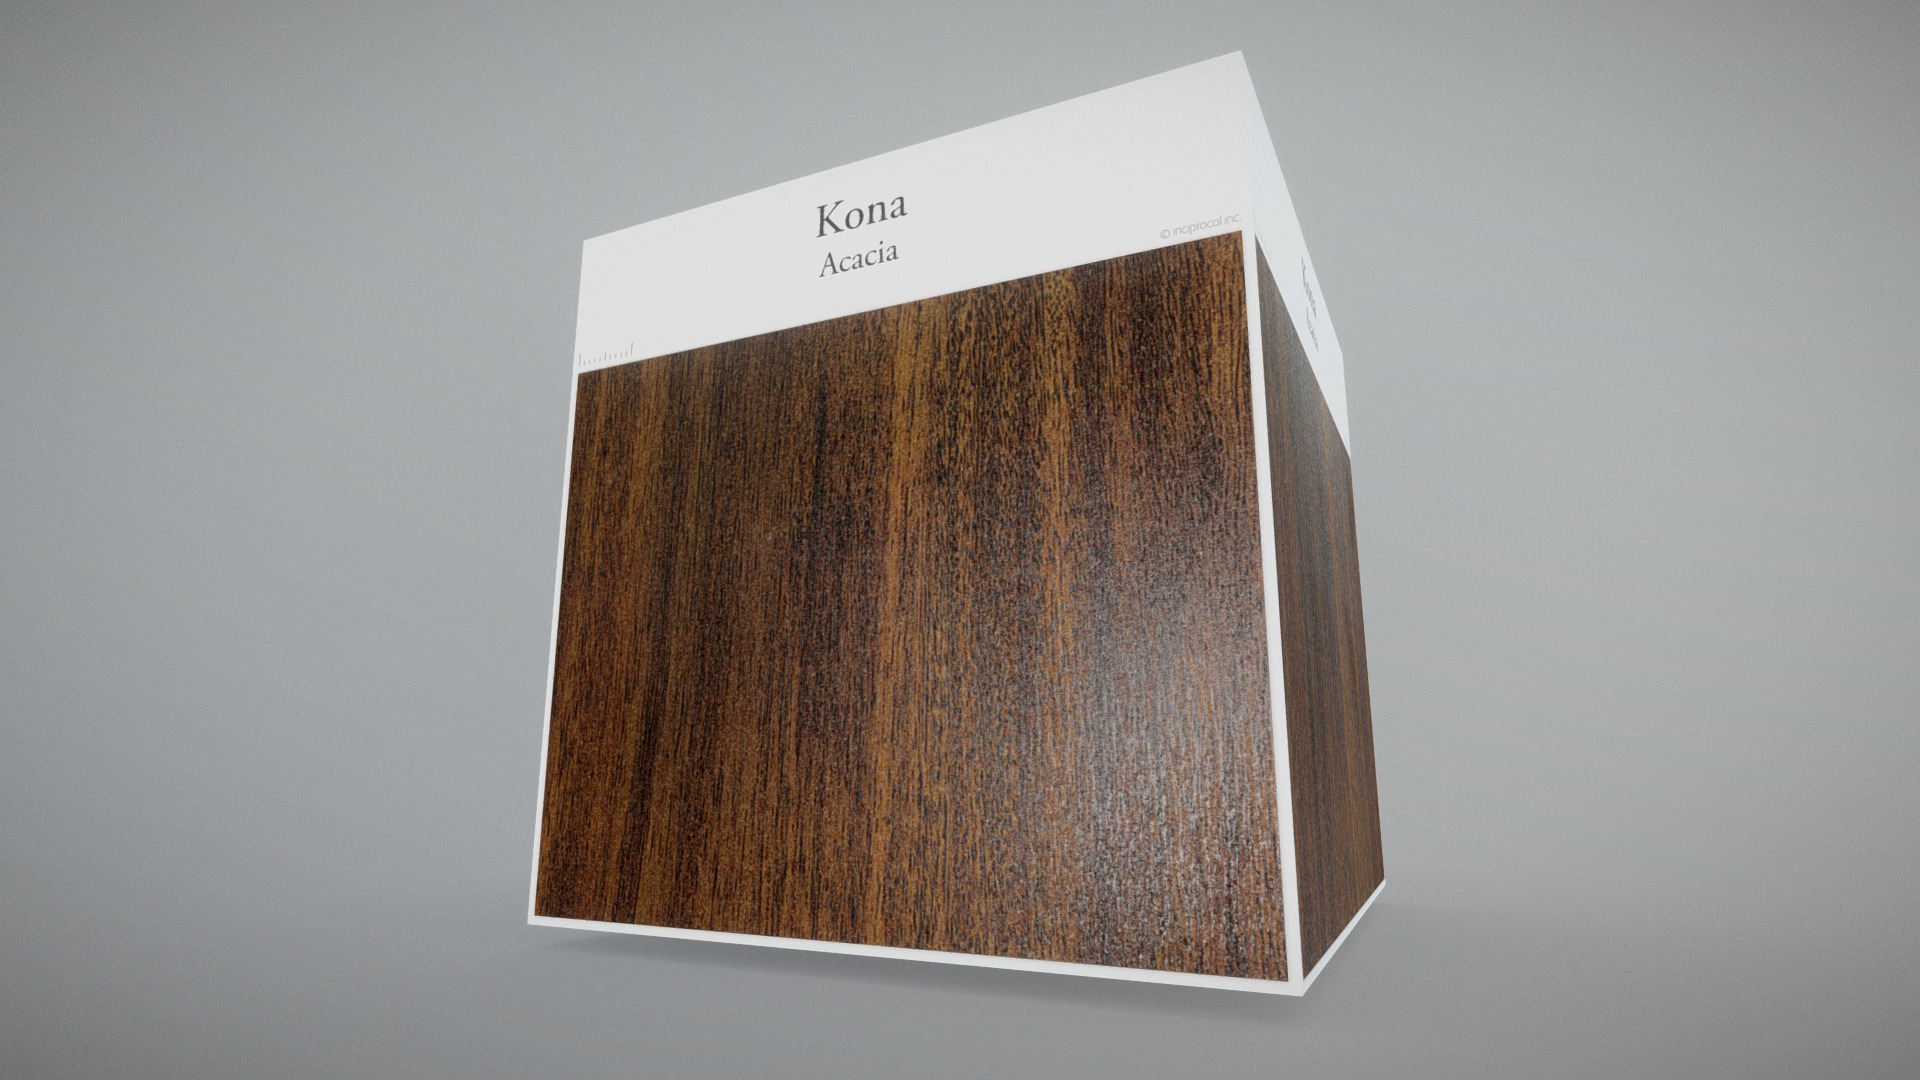 3D model Kona (Acacia) - This is a 3D model of the Kona (Acacia). The 3D model is about a box with a lid.